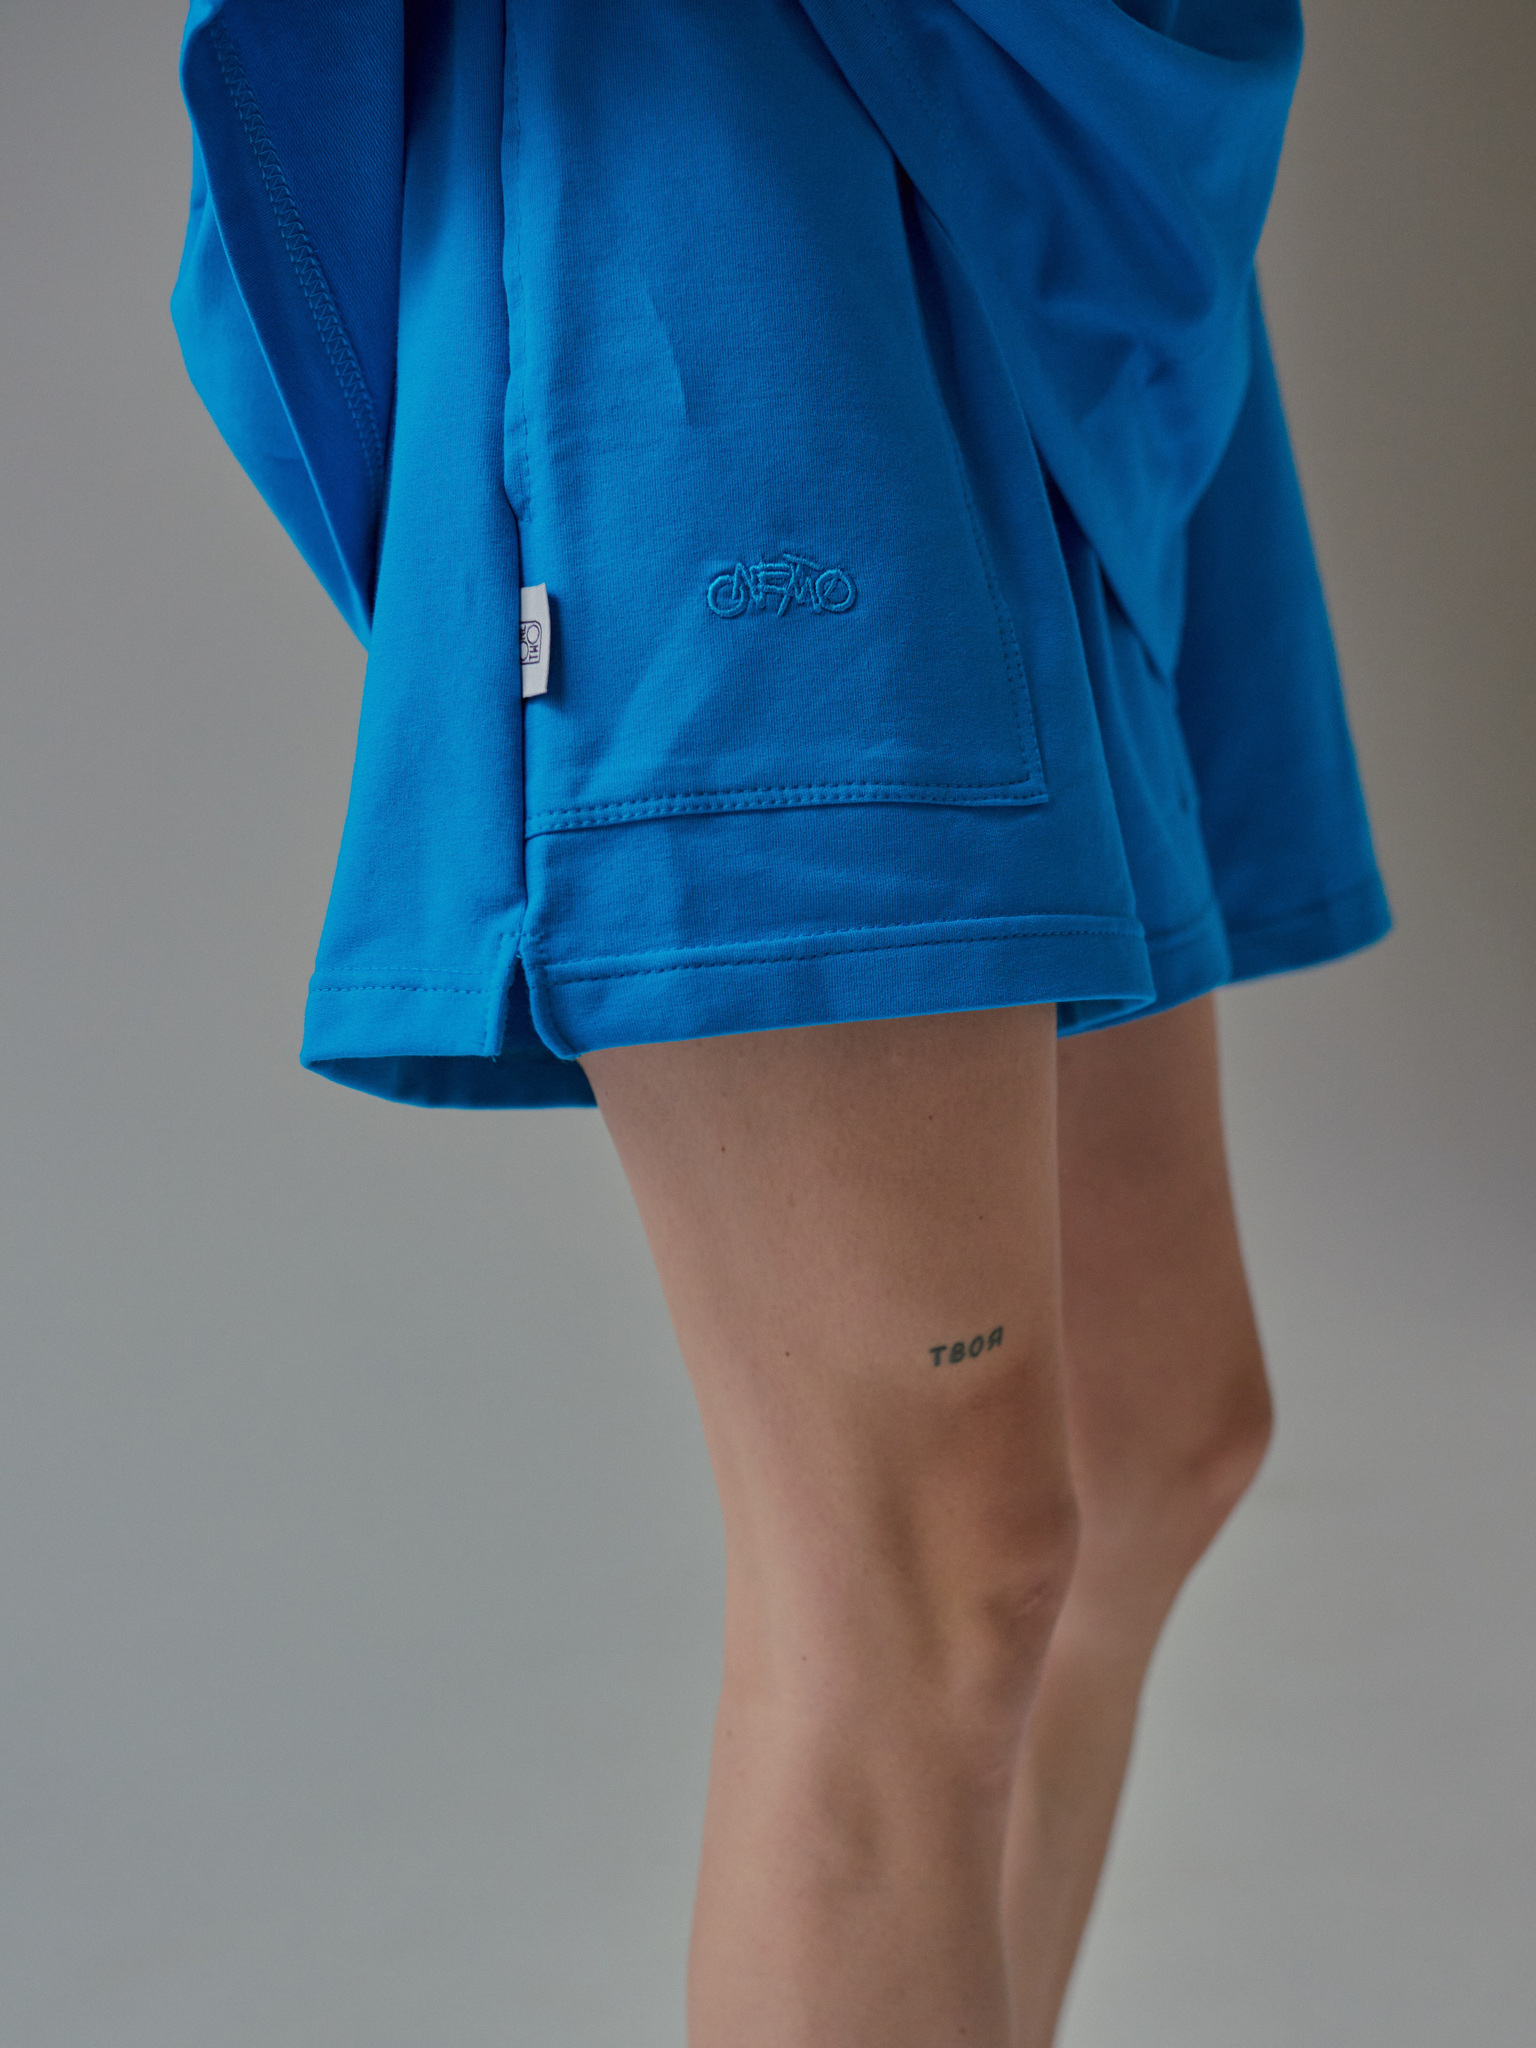 Wide Shorts for Girls Blue Jewel